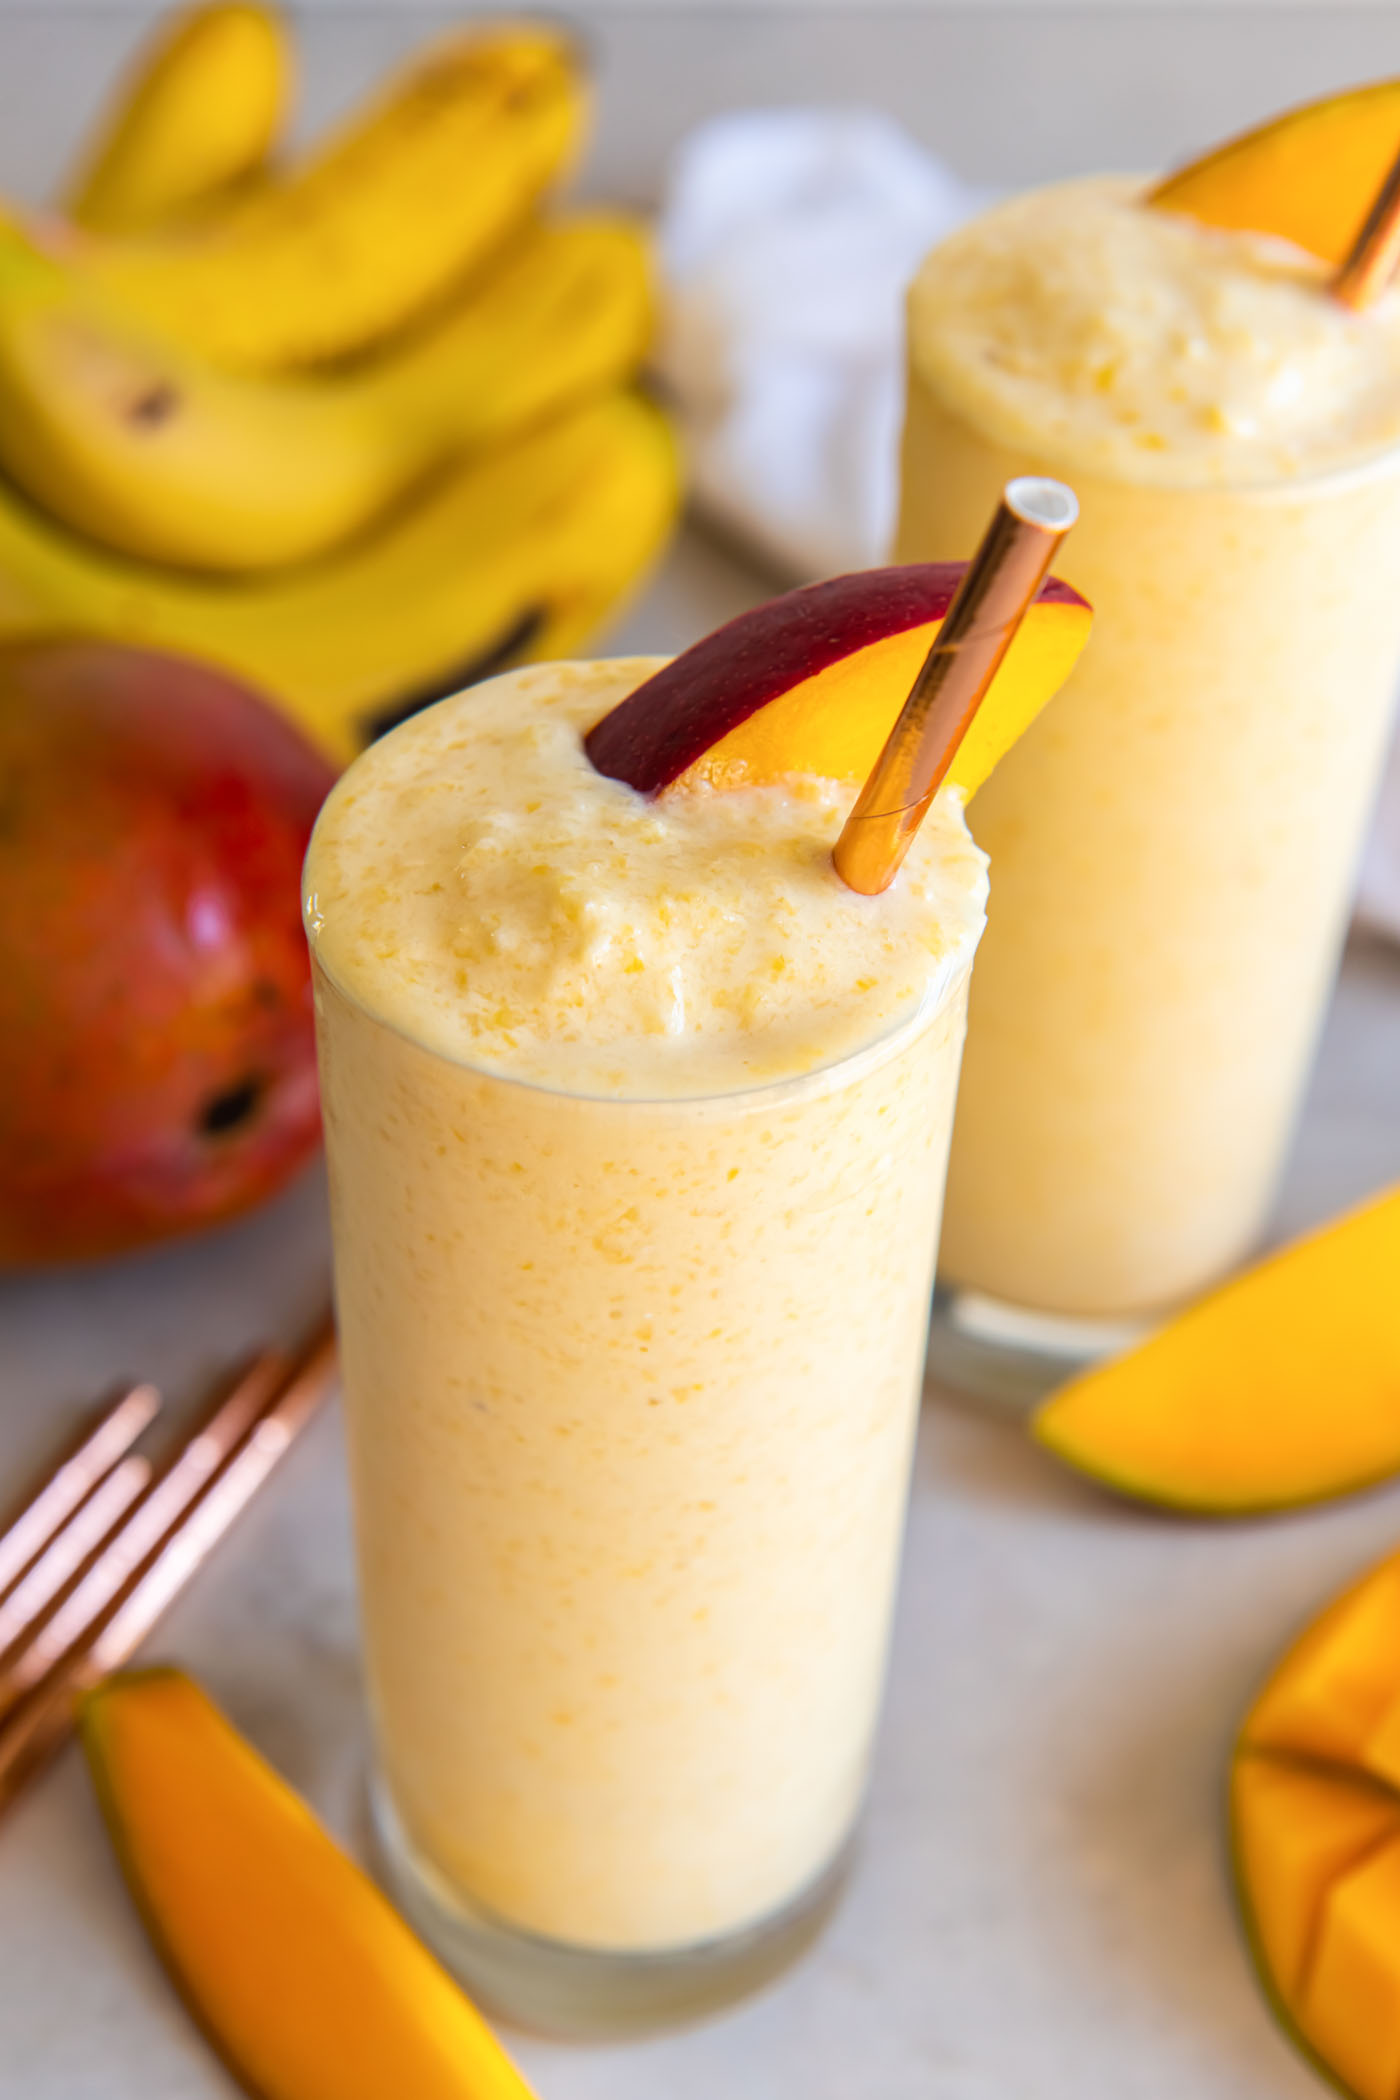 Mango smoothie in a tall glass with a mango slice and straw.